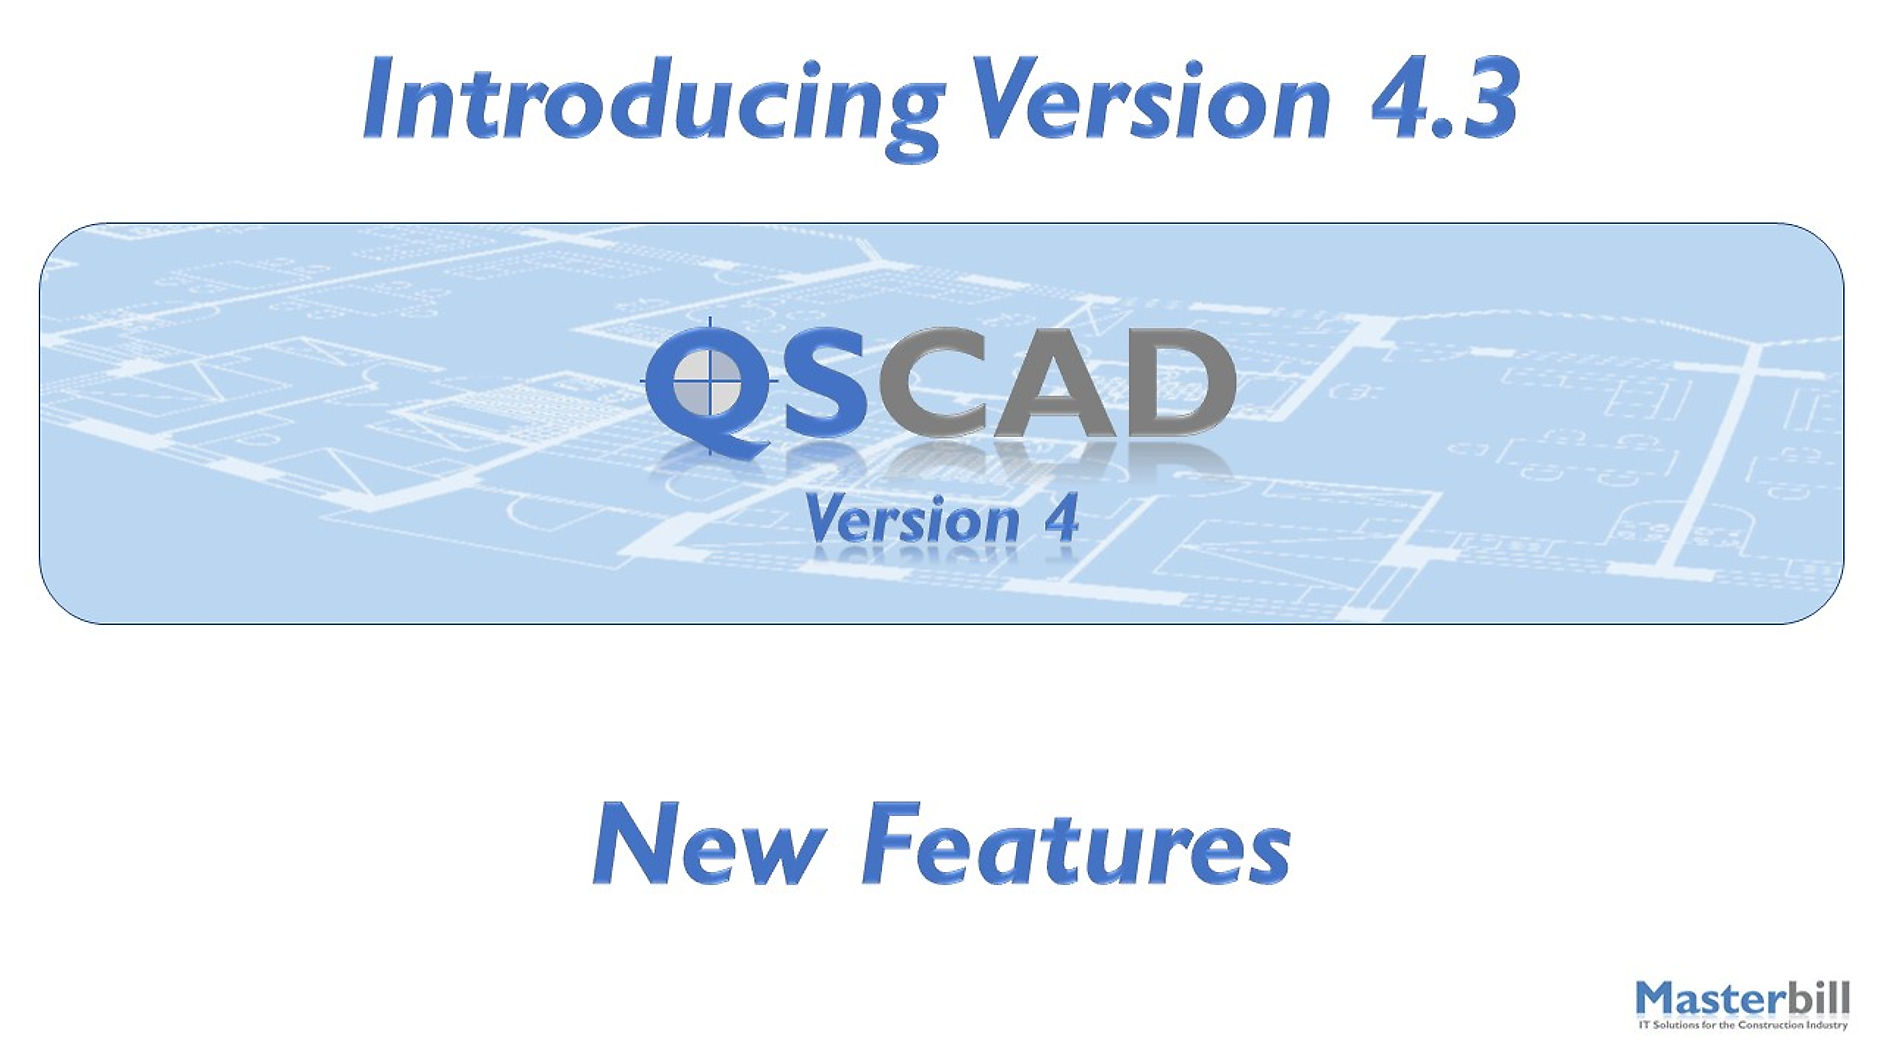 QSCadv4 Version 4.3 Features